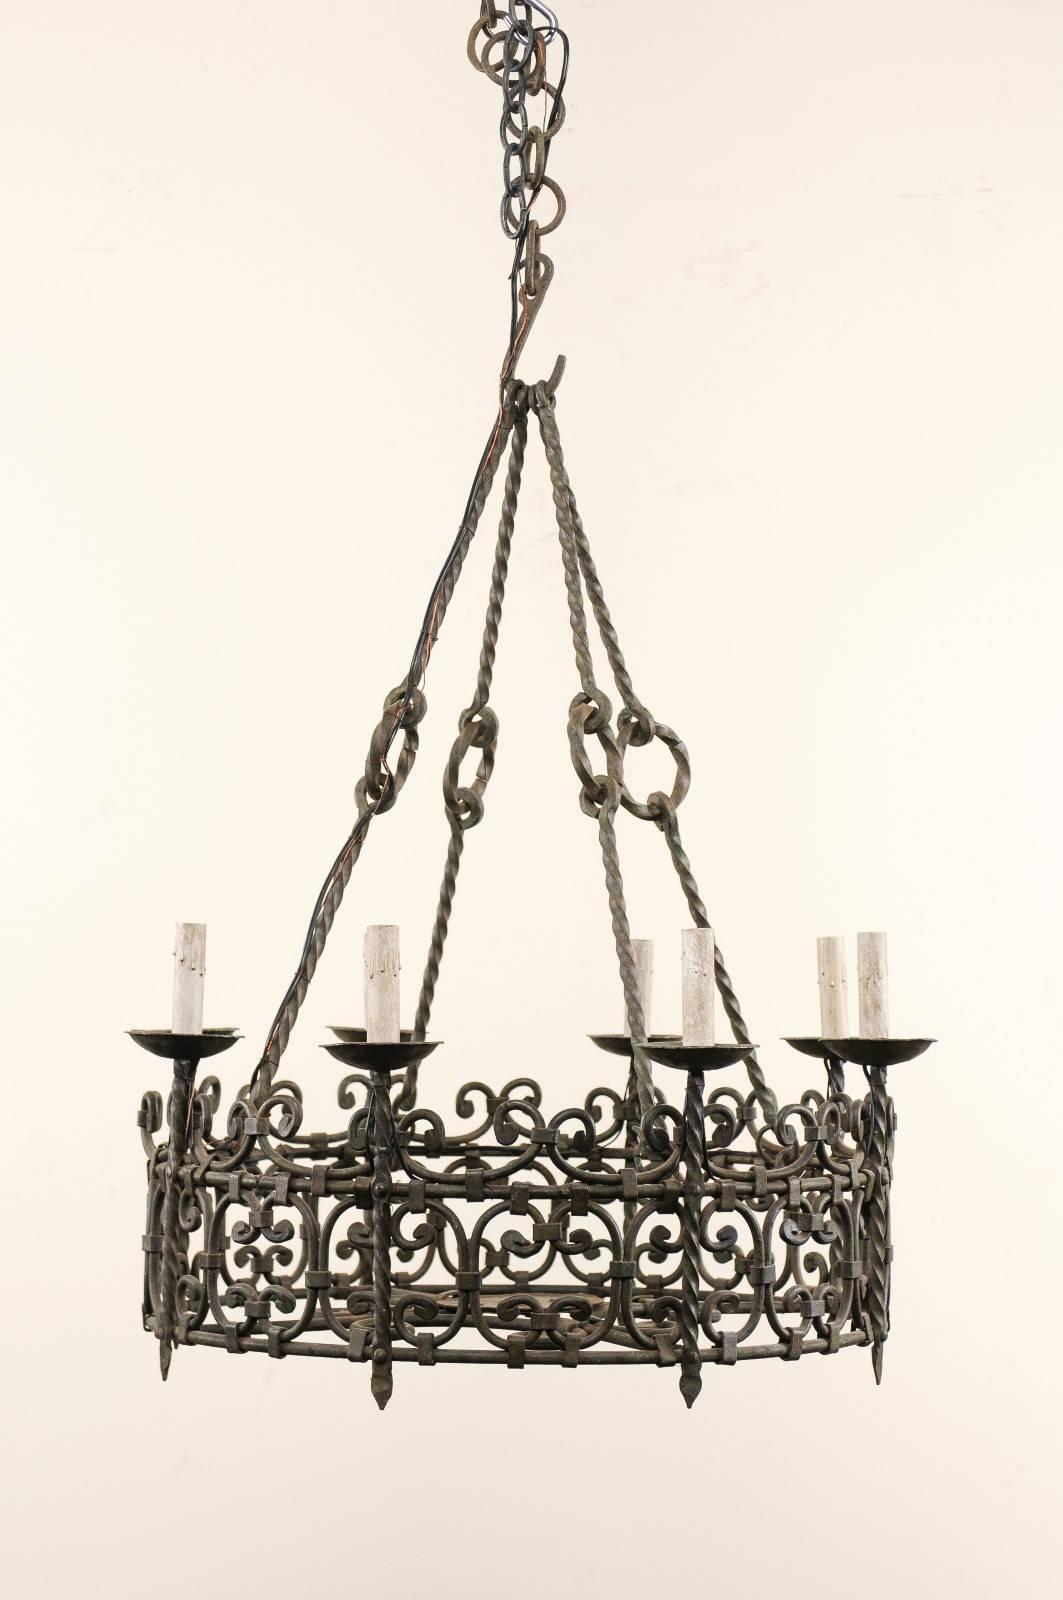 A French eight-light iron chandelier from the mid-20th century. This French midcentury chandelier features a central iron ring which is ornately decorated with a collection of c-scroll patterns throughout. There are eight torch-like lights set about